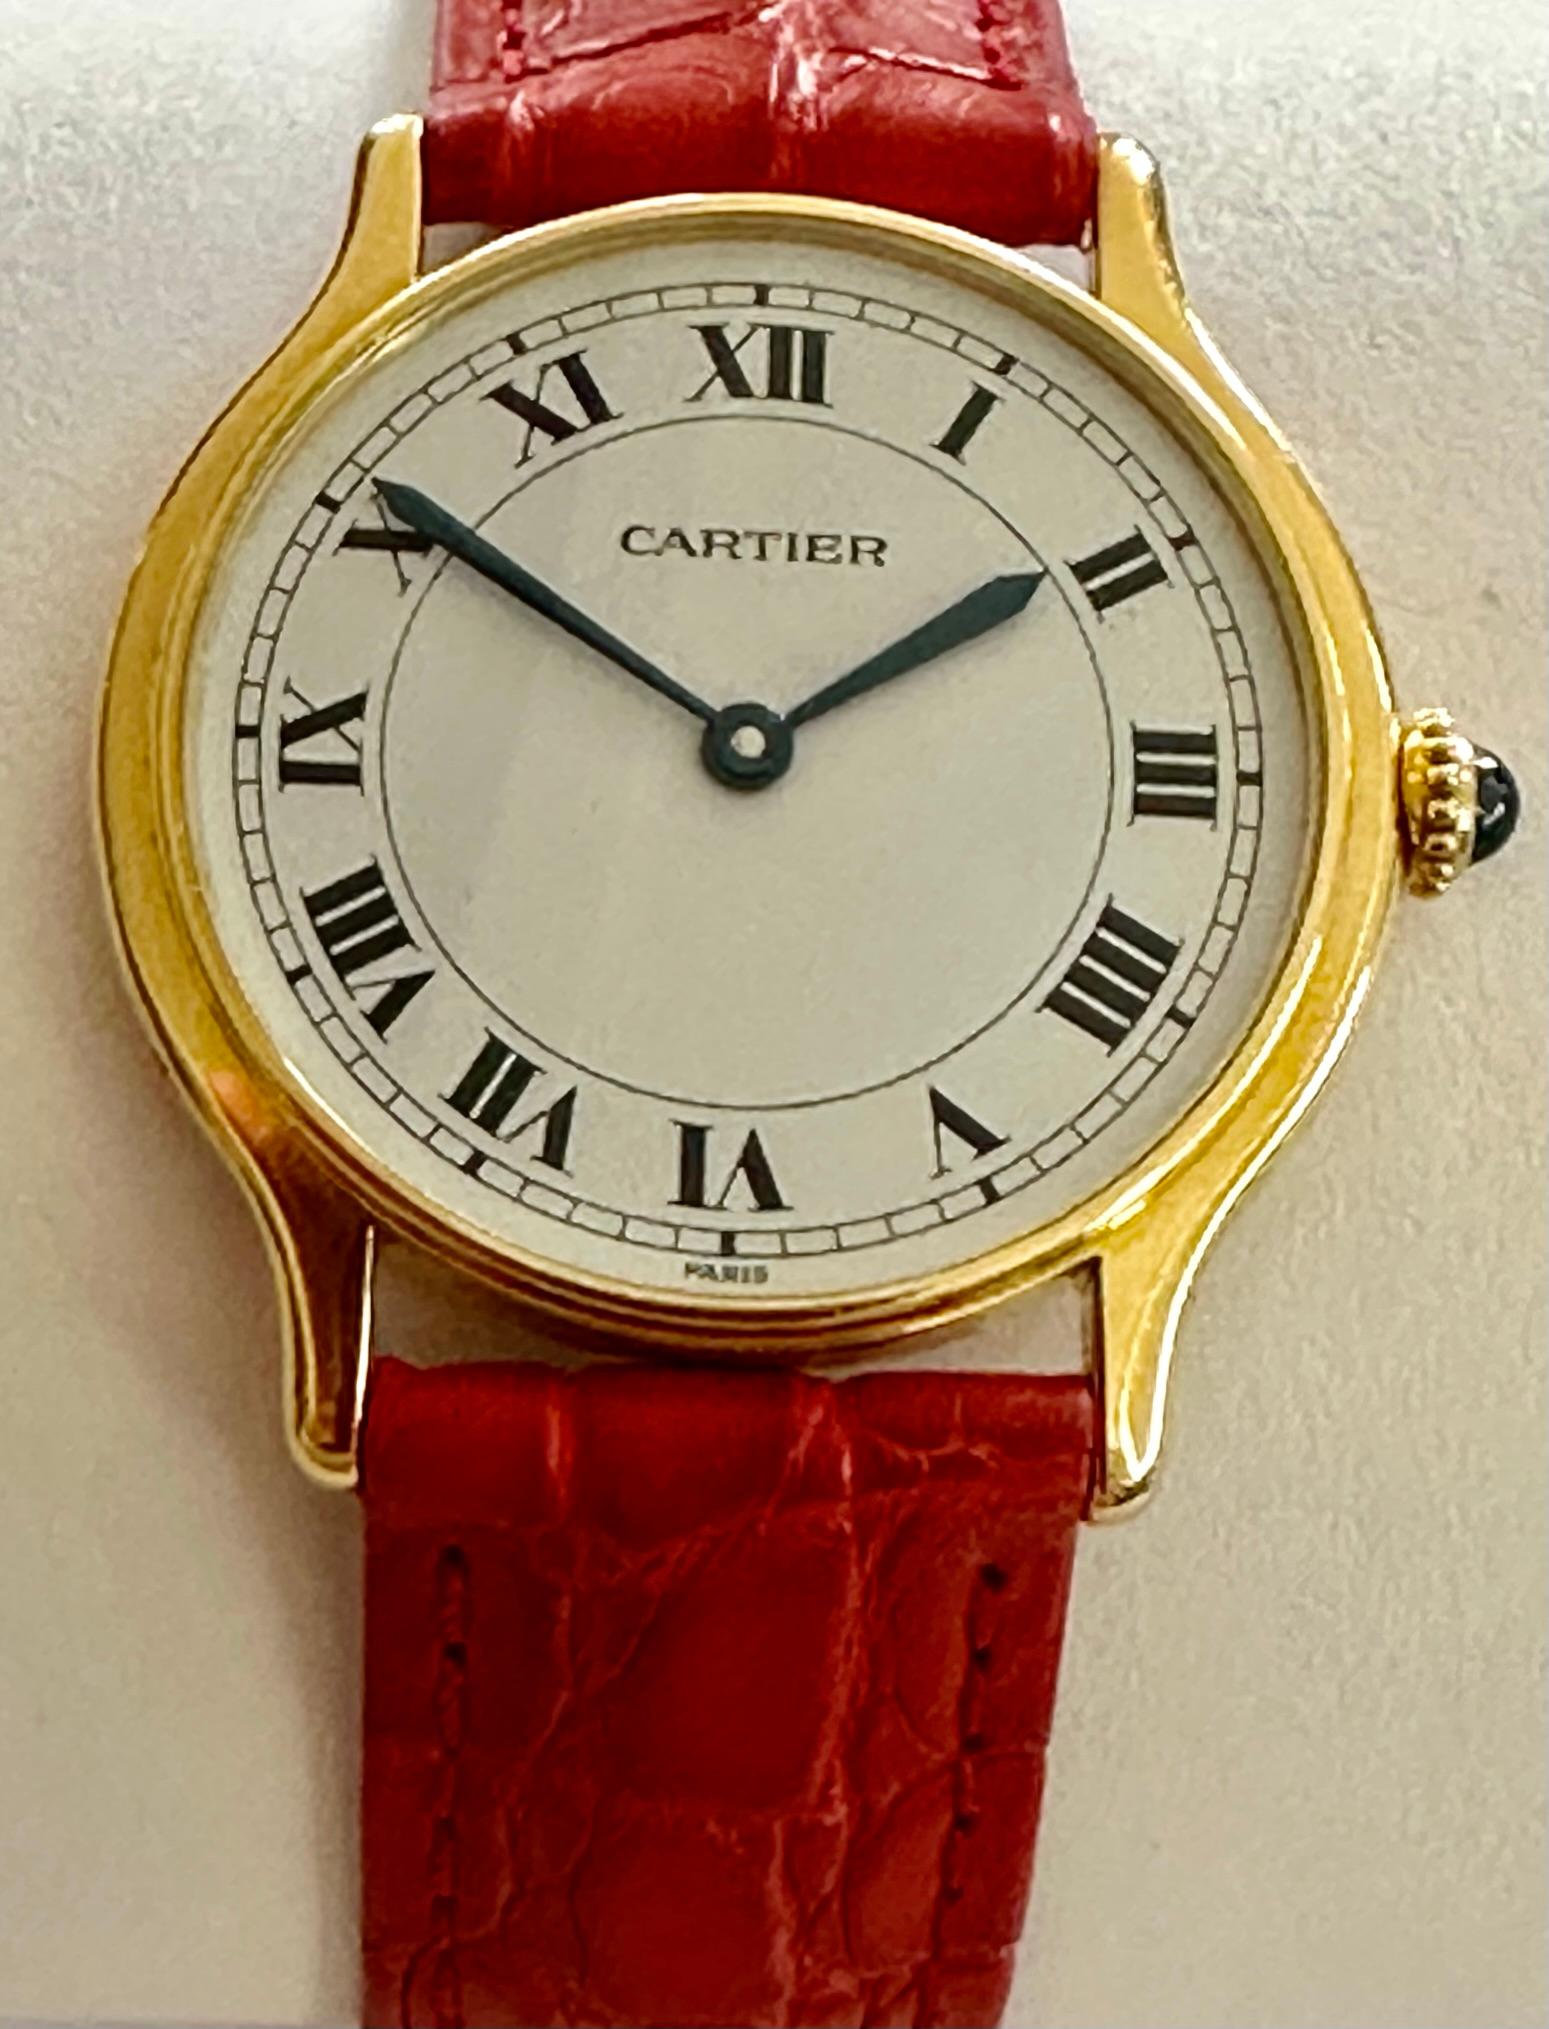 One (1) 18K. yellow gold watch with leather strap. brand: CARTIER
Model Name : Round. ( this is the large model there is also a small model made)
made between 1979 and 1984 model no: 10713.
Individual no: 1200.
Diameter: 30mm. Thickness: